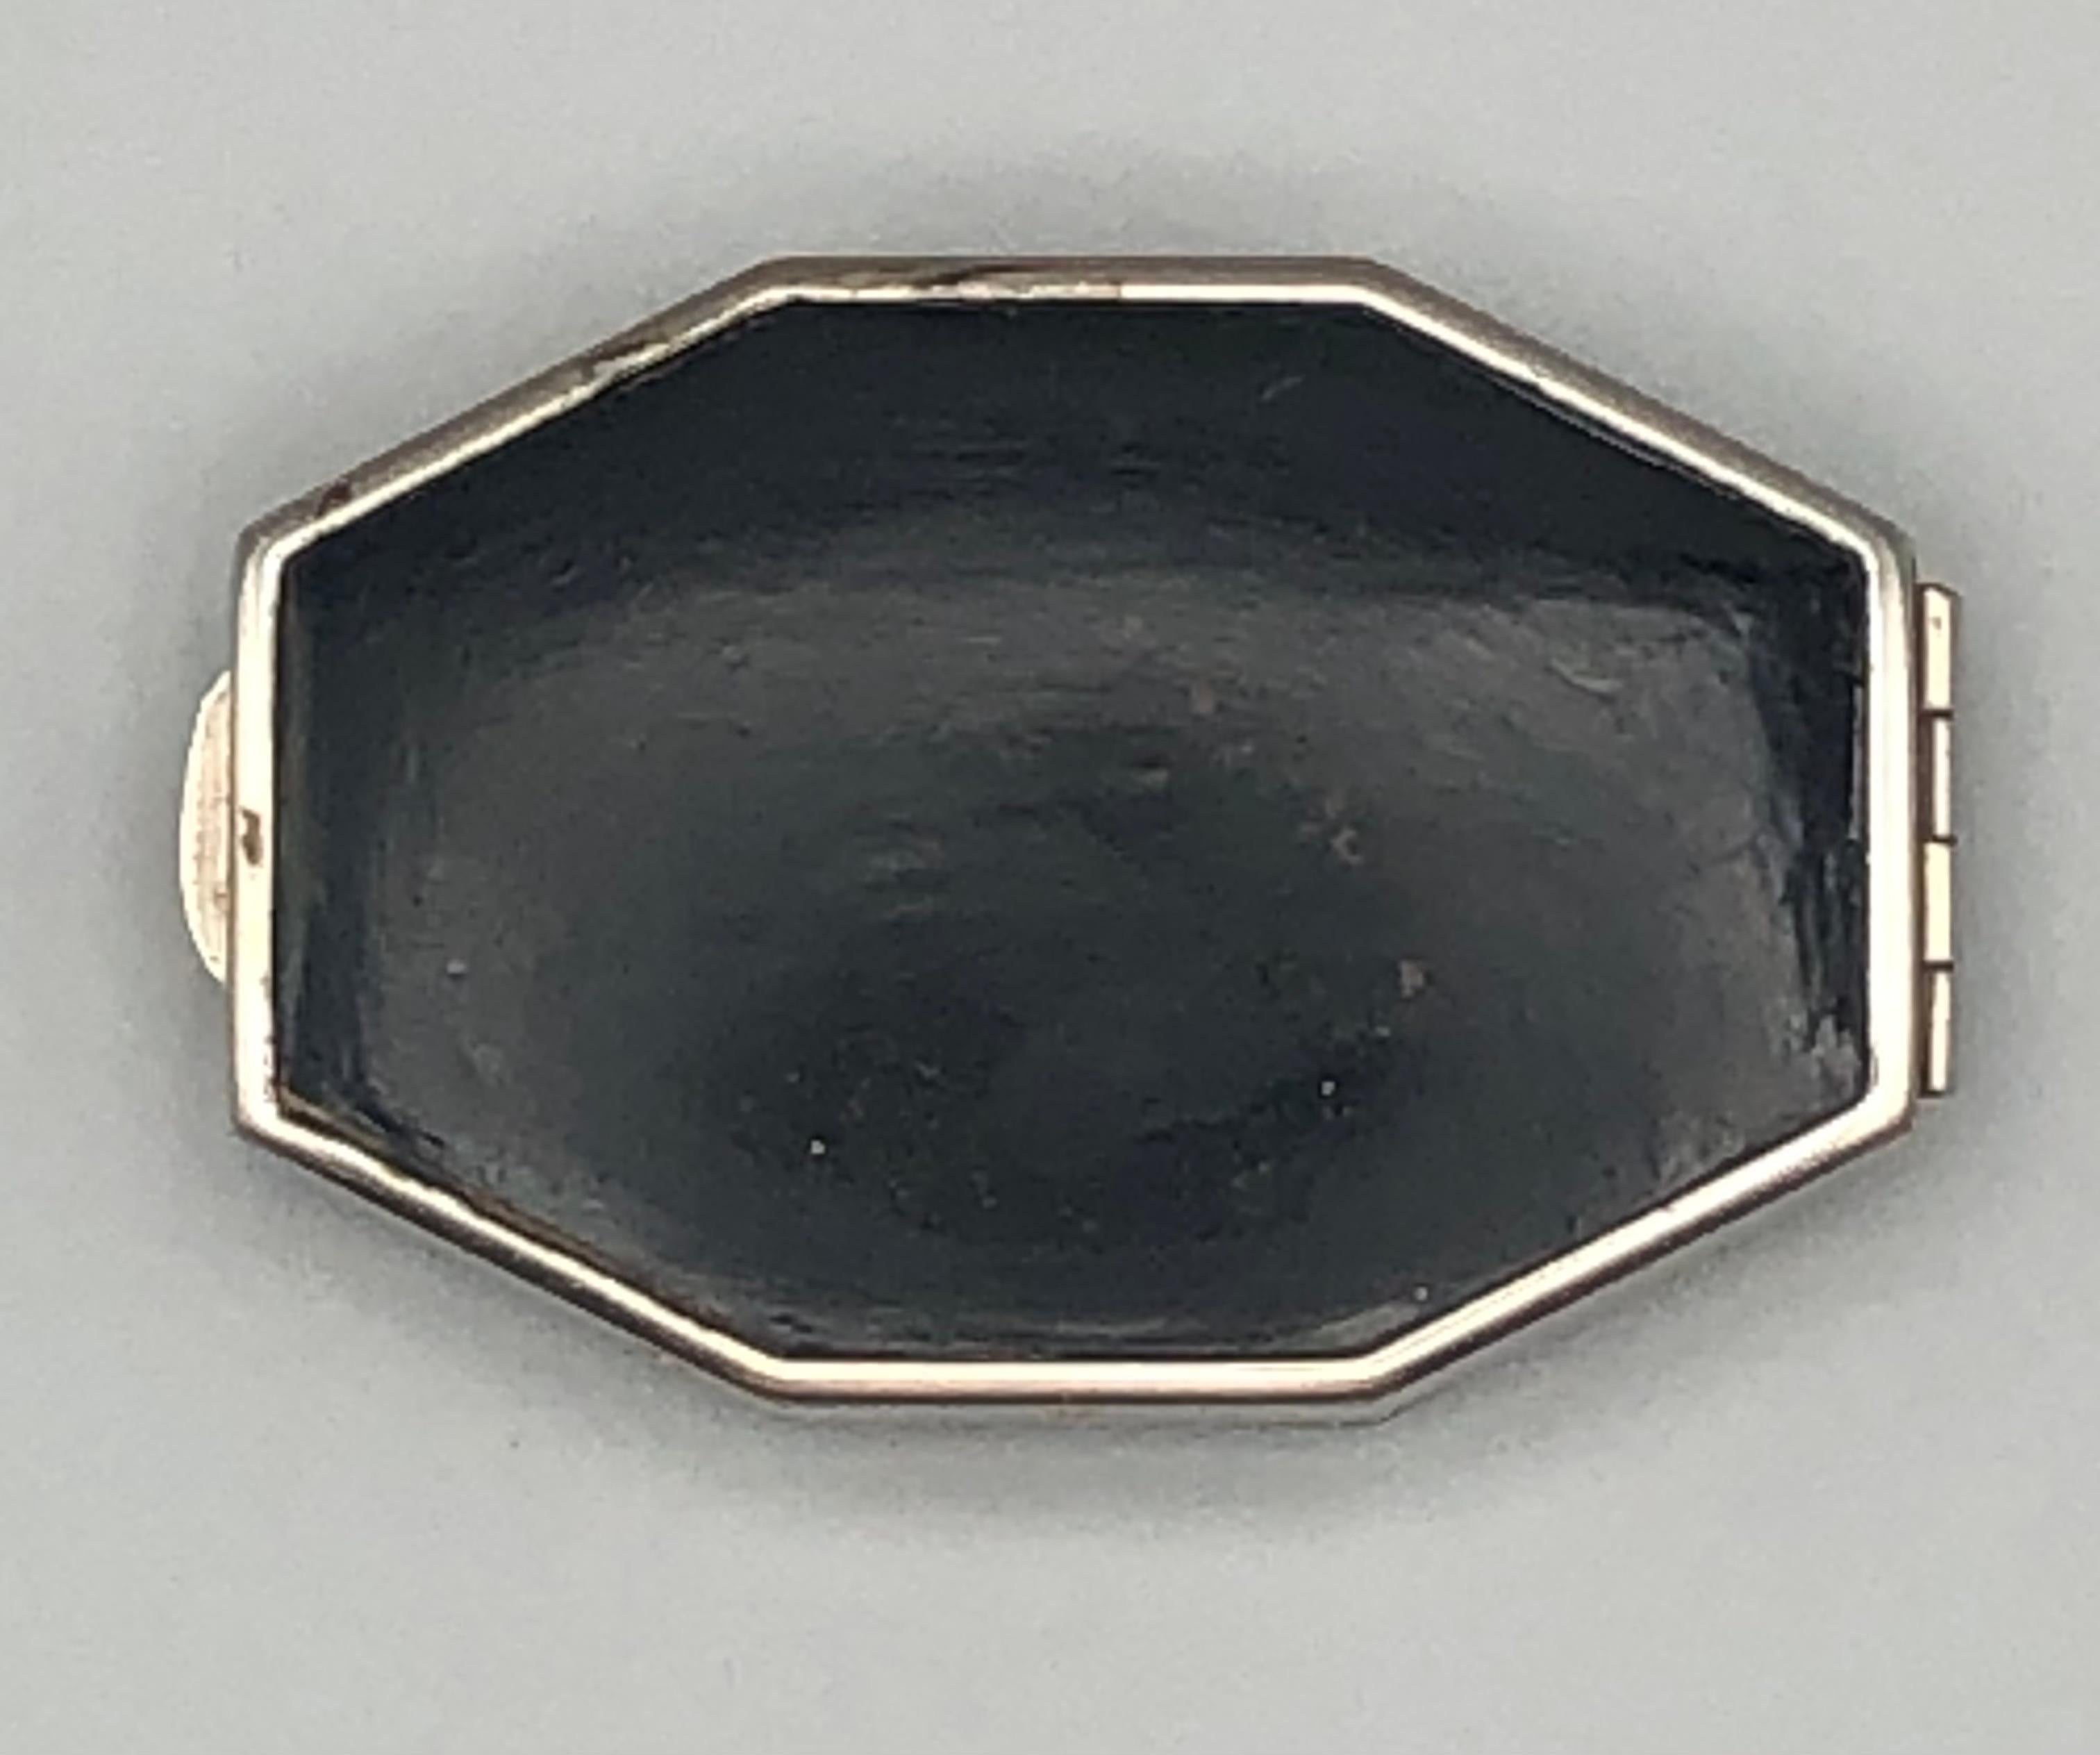 This beautiful compact is in excellent working condition. On the front of the case is an image of Chicago’s skyline with the inscription ‘Worlds Fair Chicago 1933 - 1934’. The black enamel is in wonderful condition, only showing very gentle signs of